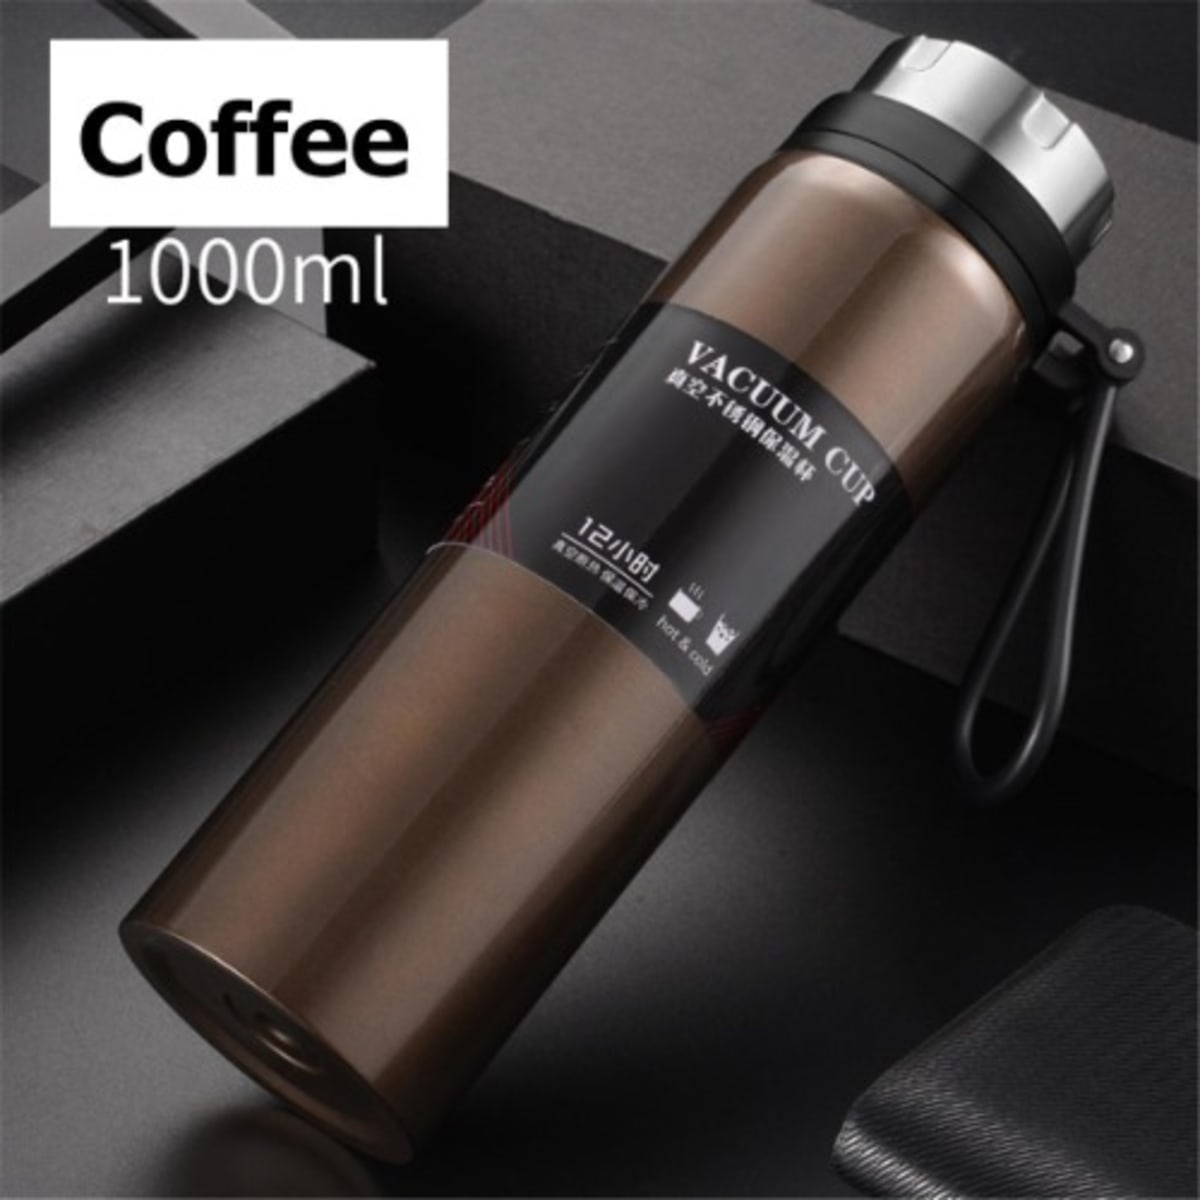 Portable Stainless Steel Bottle Vacuum Cold Thermos Cup Insulated